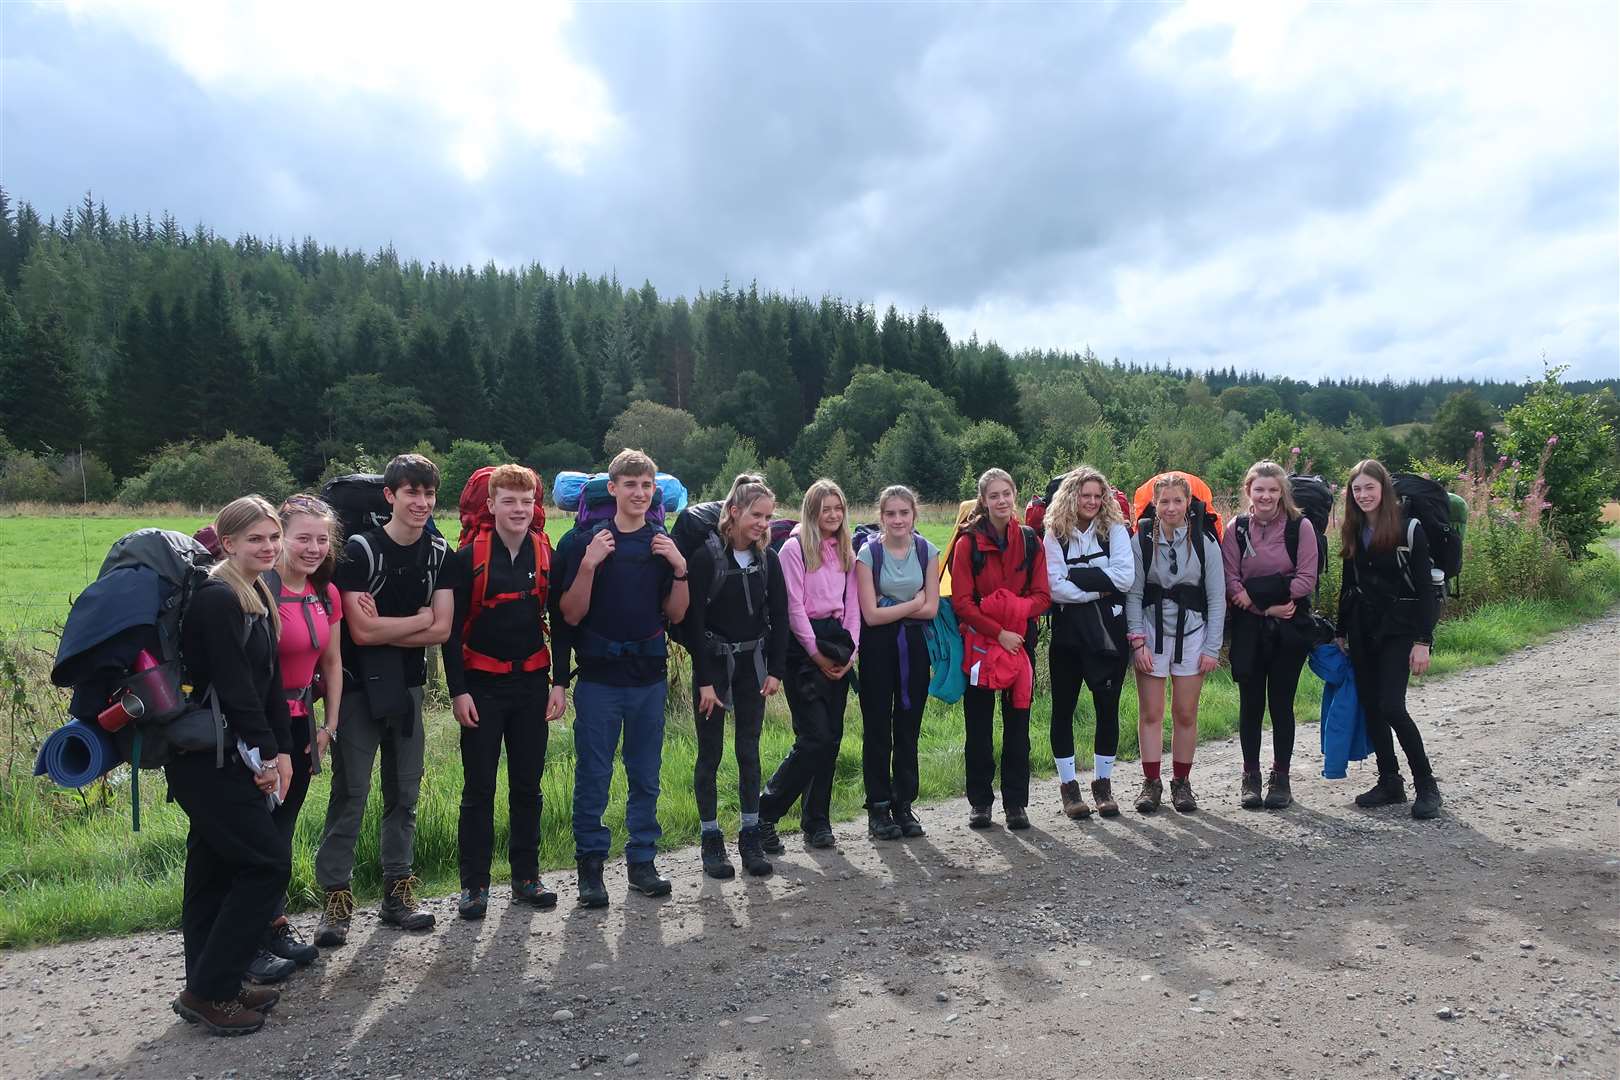 The Inverness Royal Academy pupils ready for adventure at the start of the expedition.